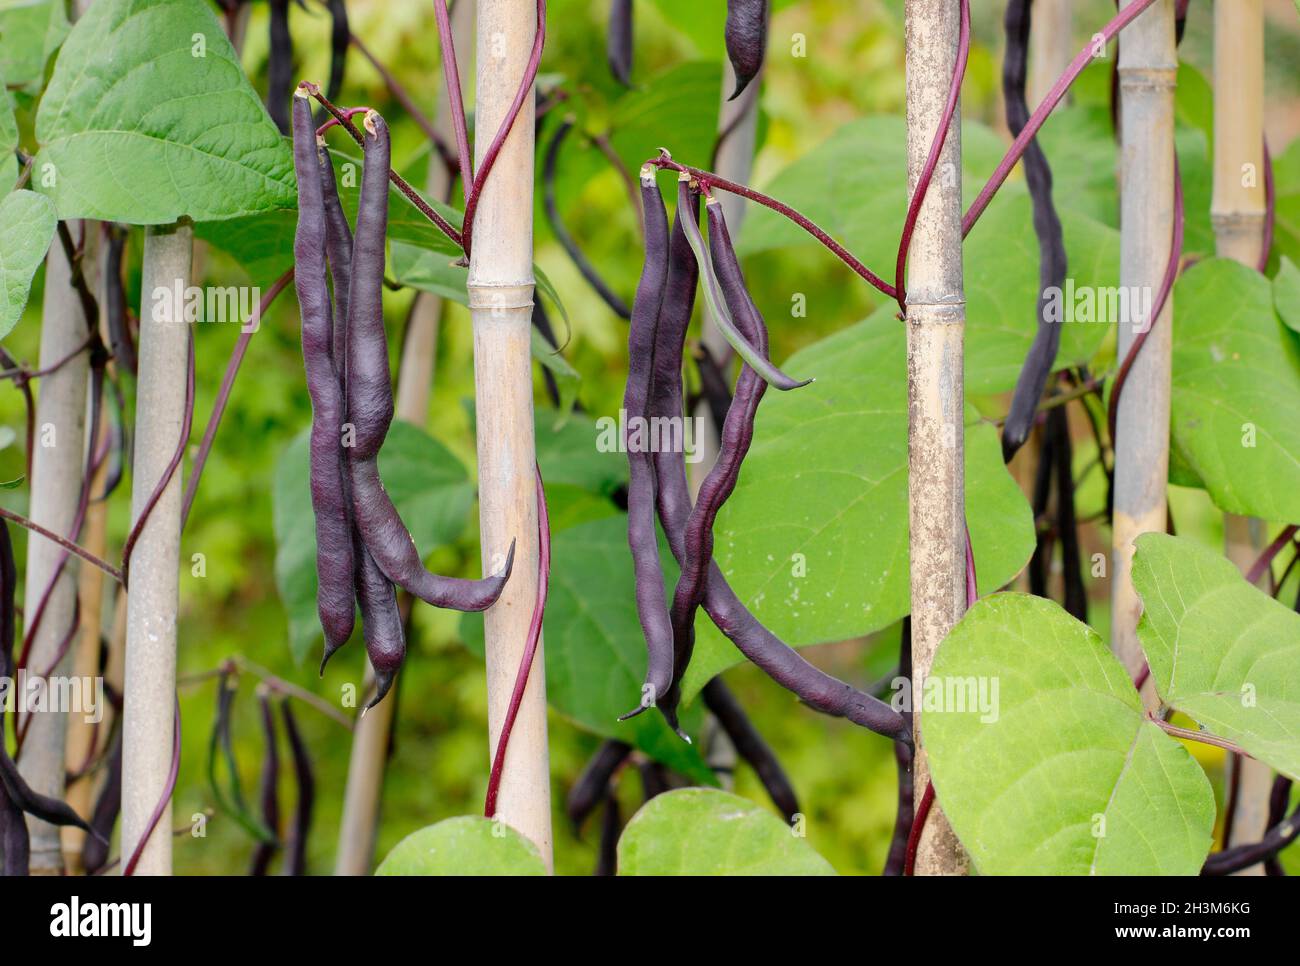 French bean plant. Phaseolus vulgaris 'Violet podded' climbing French beans growing up canes in a kitchen garden. UK Stock Photo